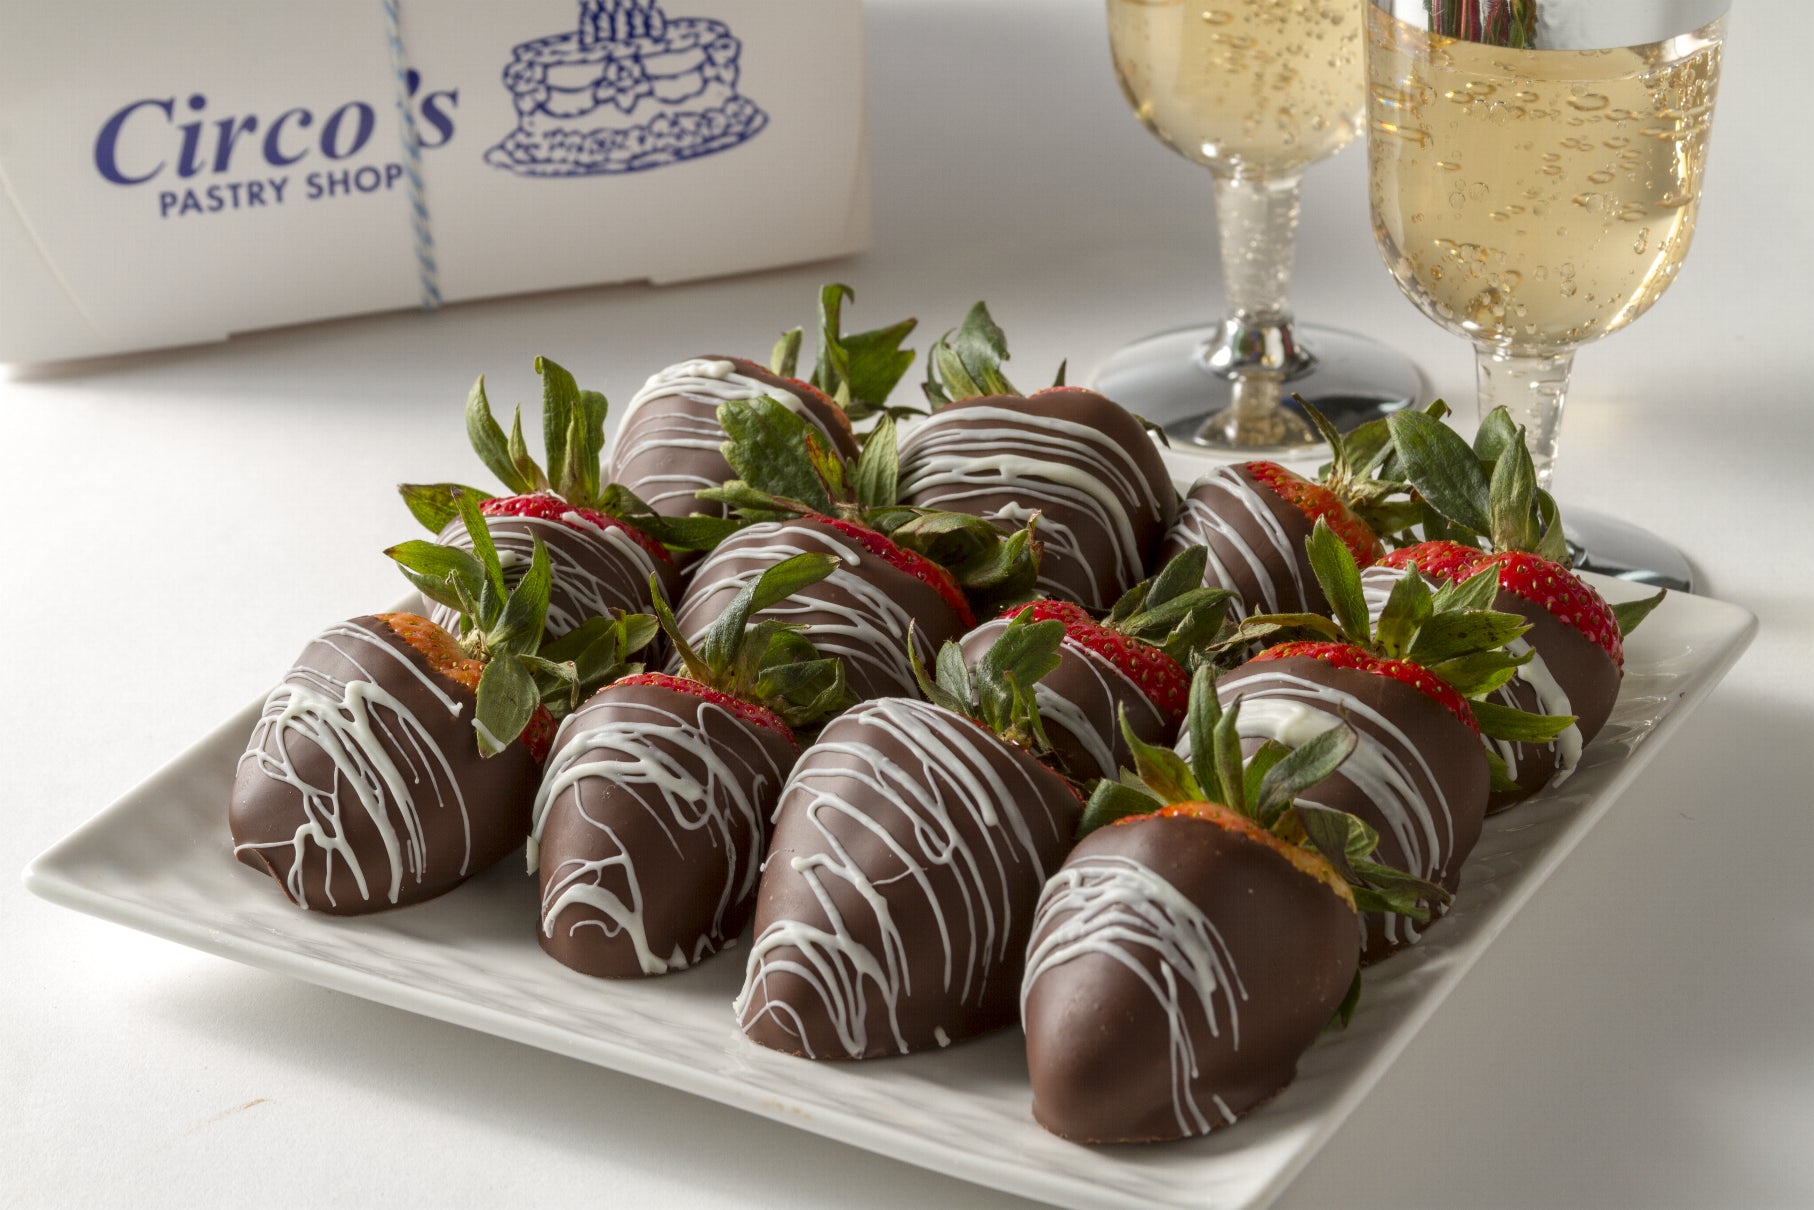 Chocolate Covered Strawberries 1 LB. Box For Local Delivery or Curbside Pickup ONLY